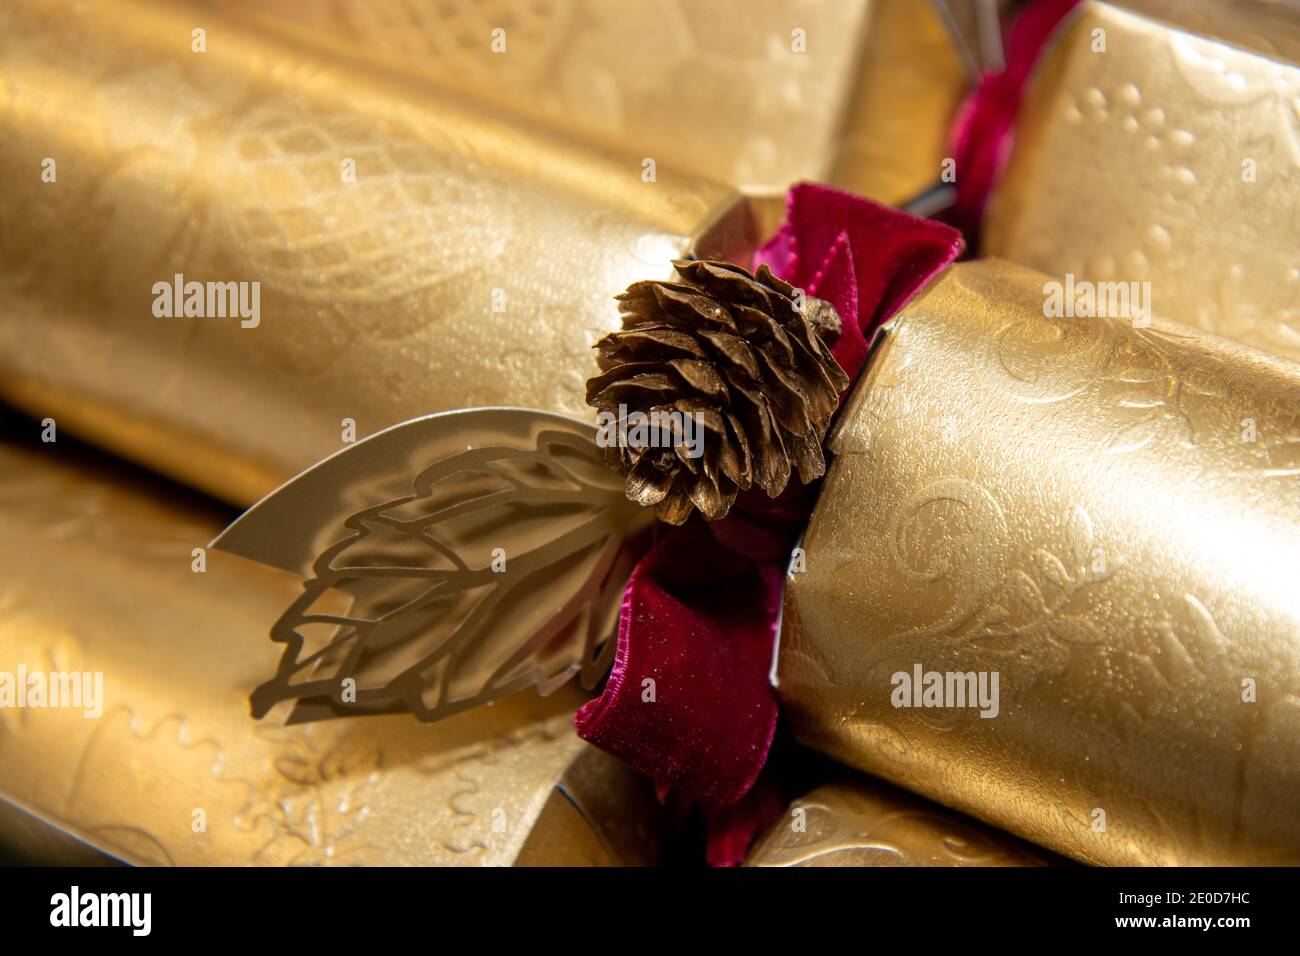 A classic British UK Christmas cracker with a golden acornA classic British UK Christmas cracker with a golden acorn Stock Photo